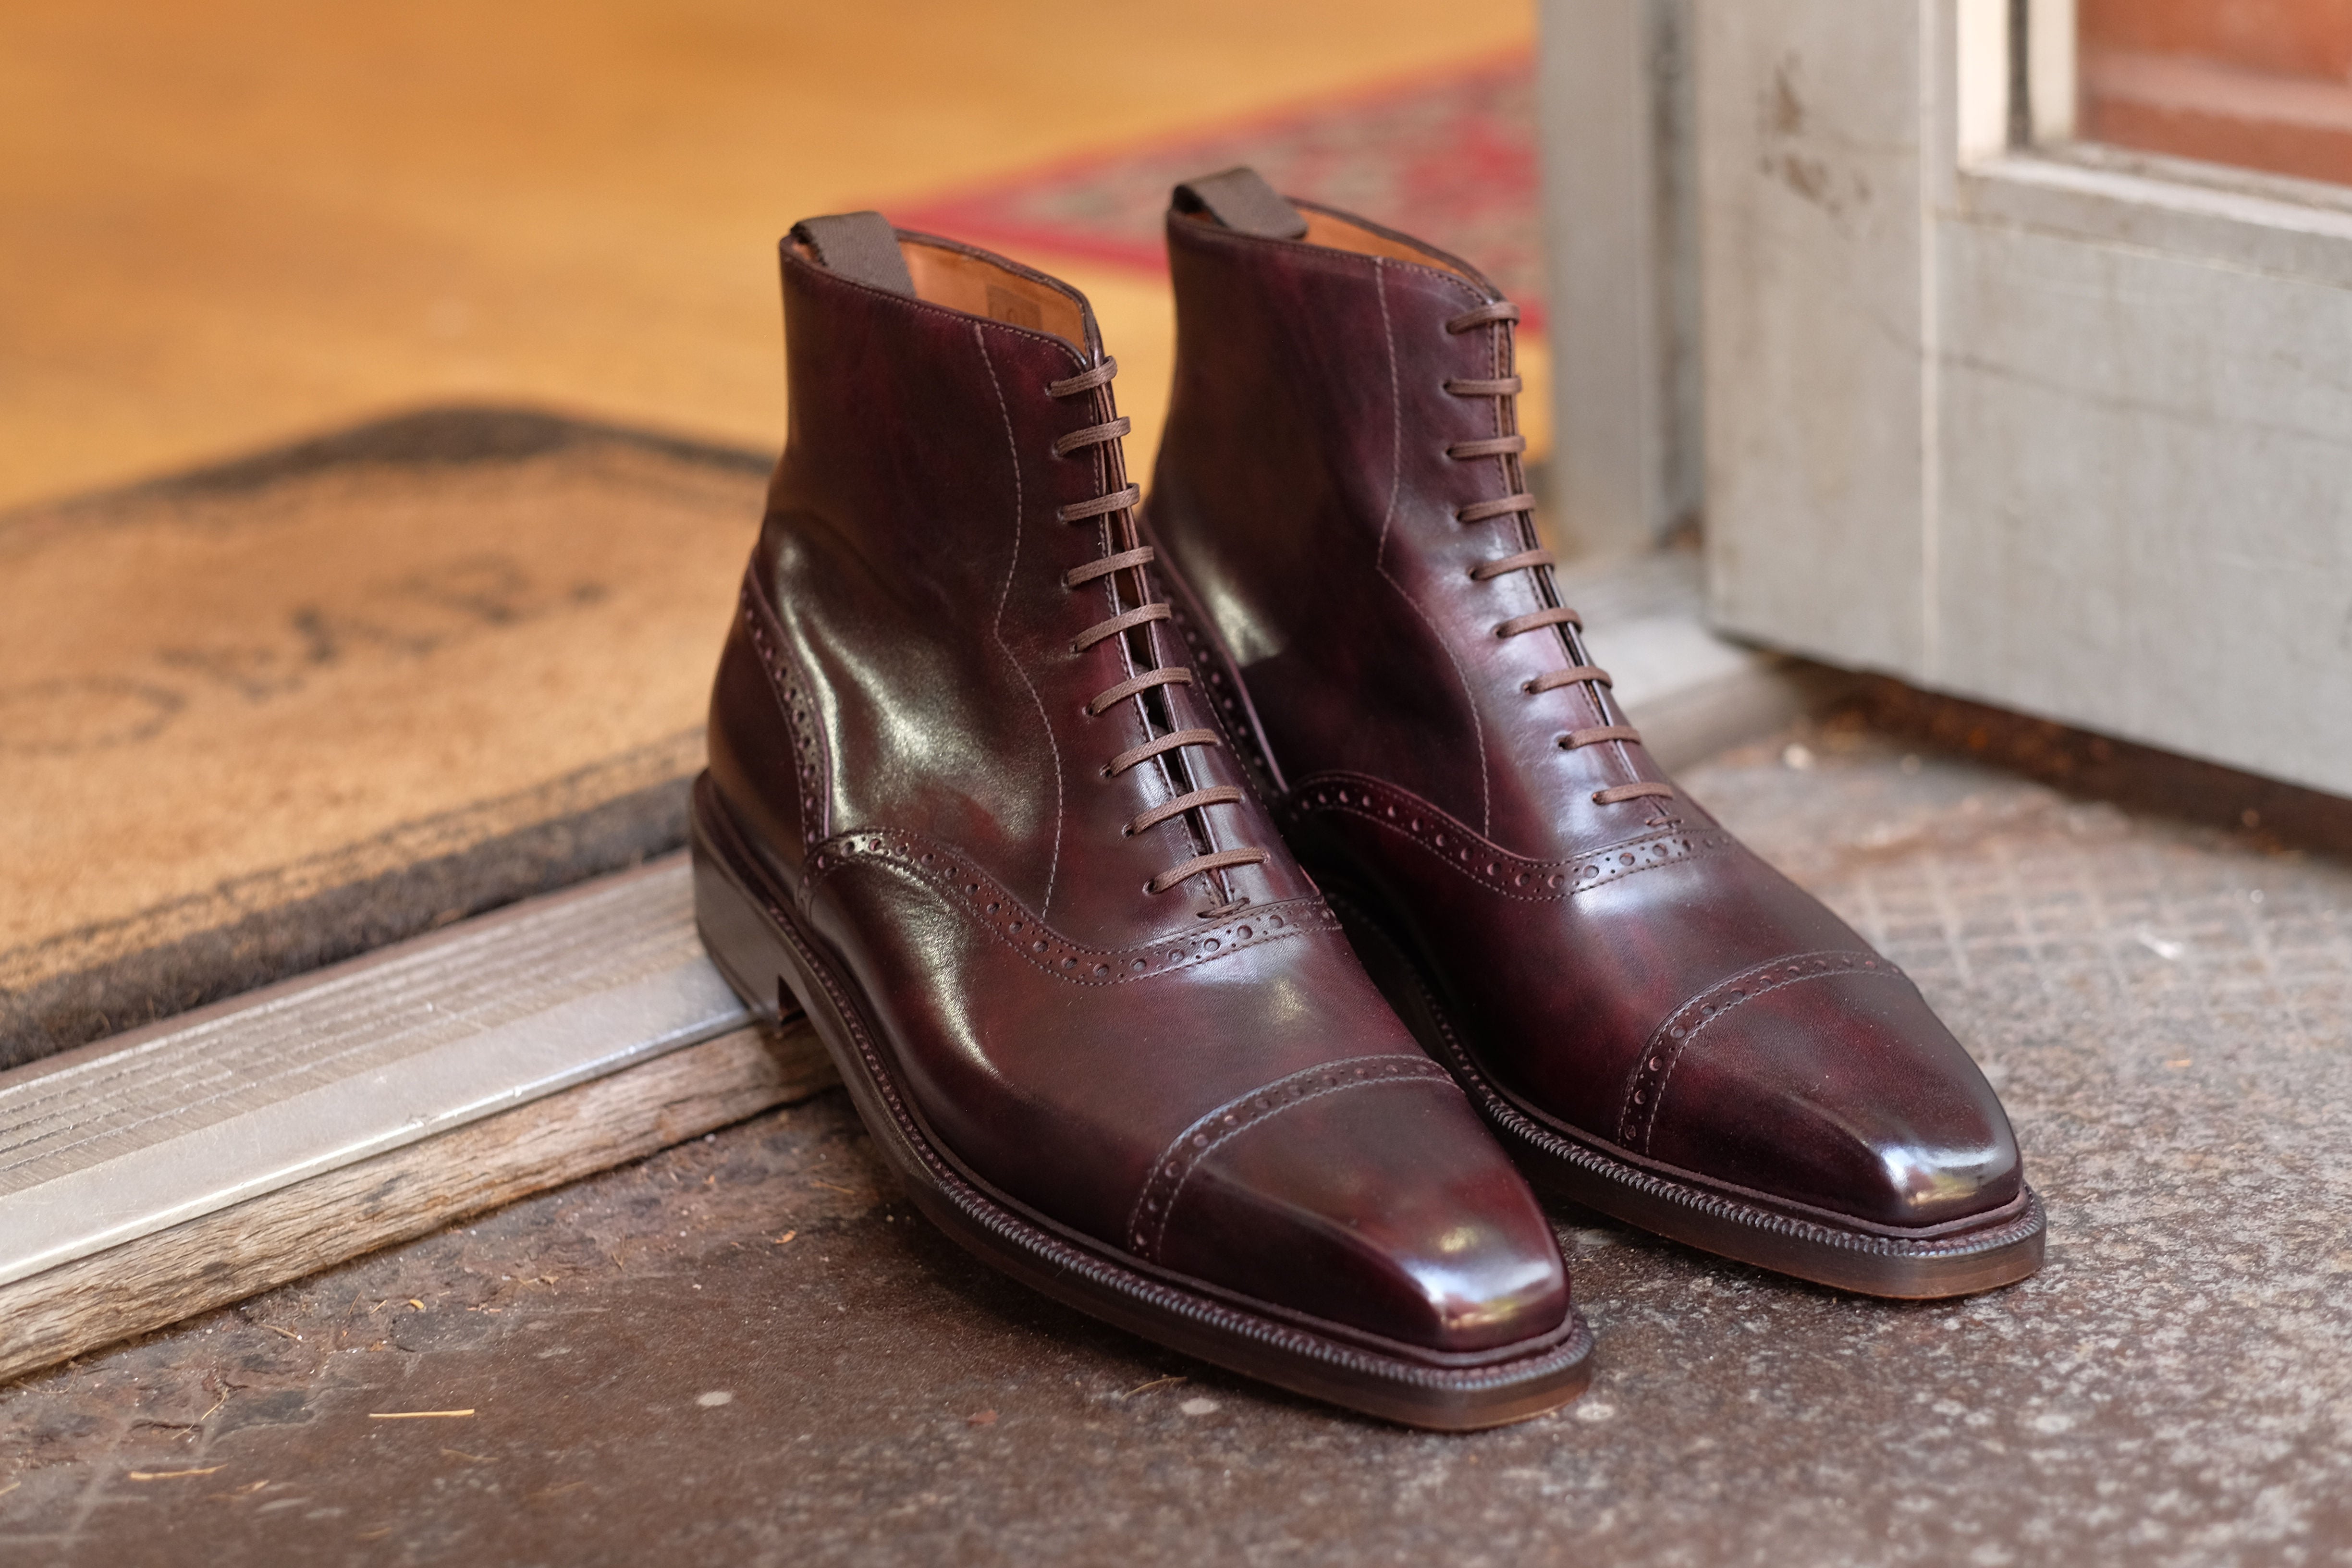 Seaview - MTO - Plum Museum Calf - MGF Last - Double Leather Sole - Storm Welt